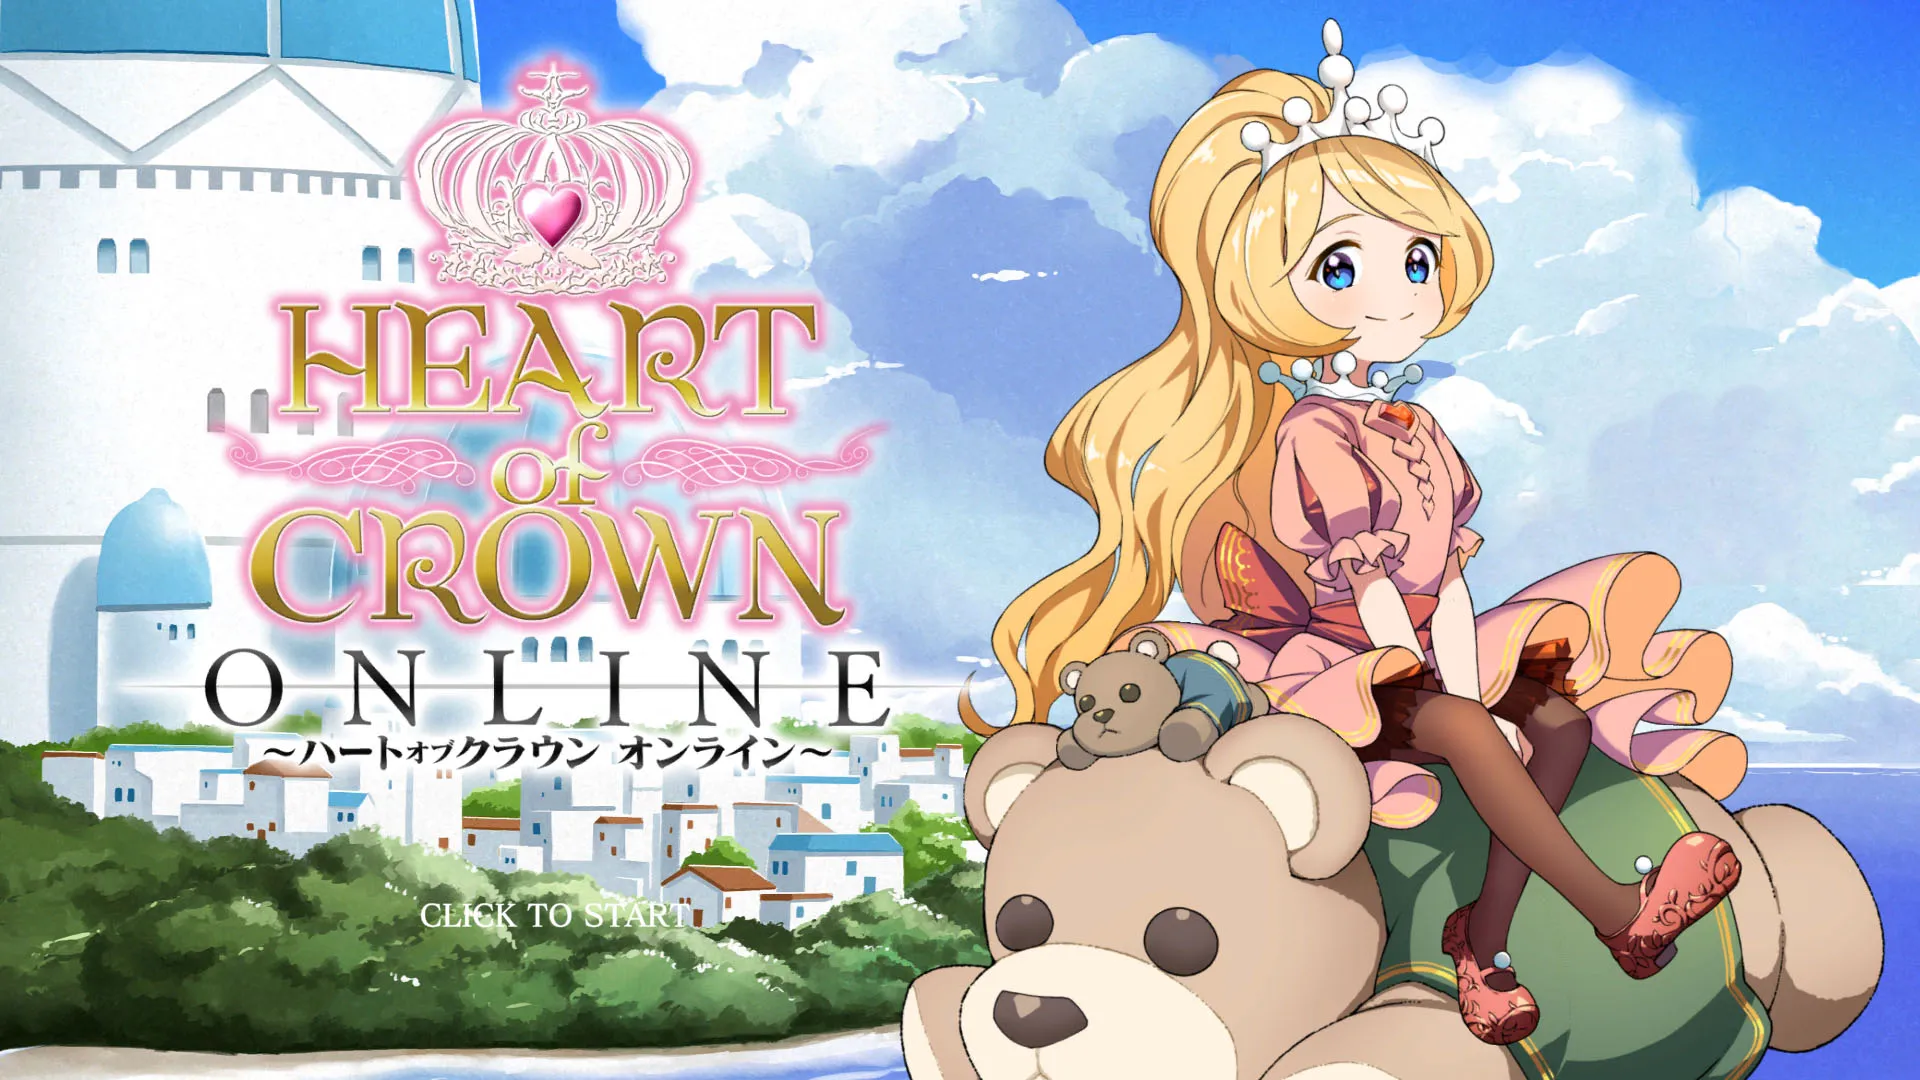 Deckbuilder card game HEART of CROWN Online for PC now available in Early Access - Gematsu